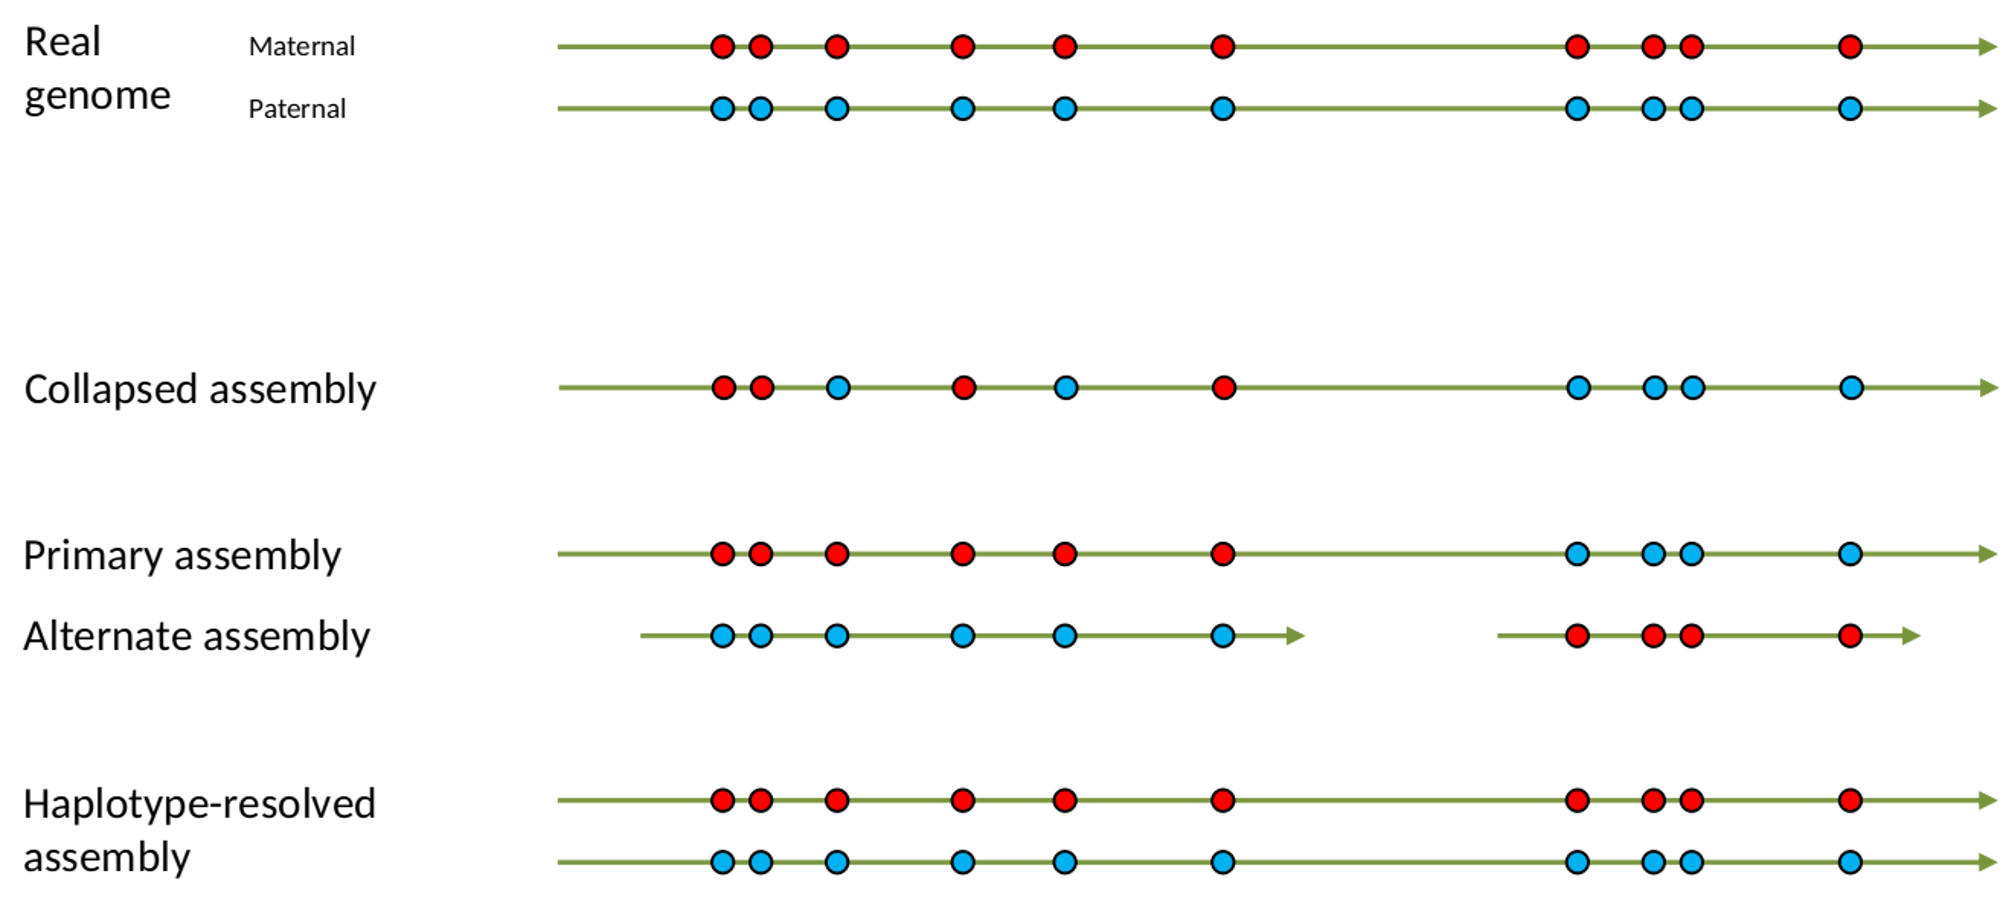 Illustration of the assembly types